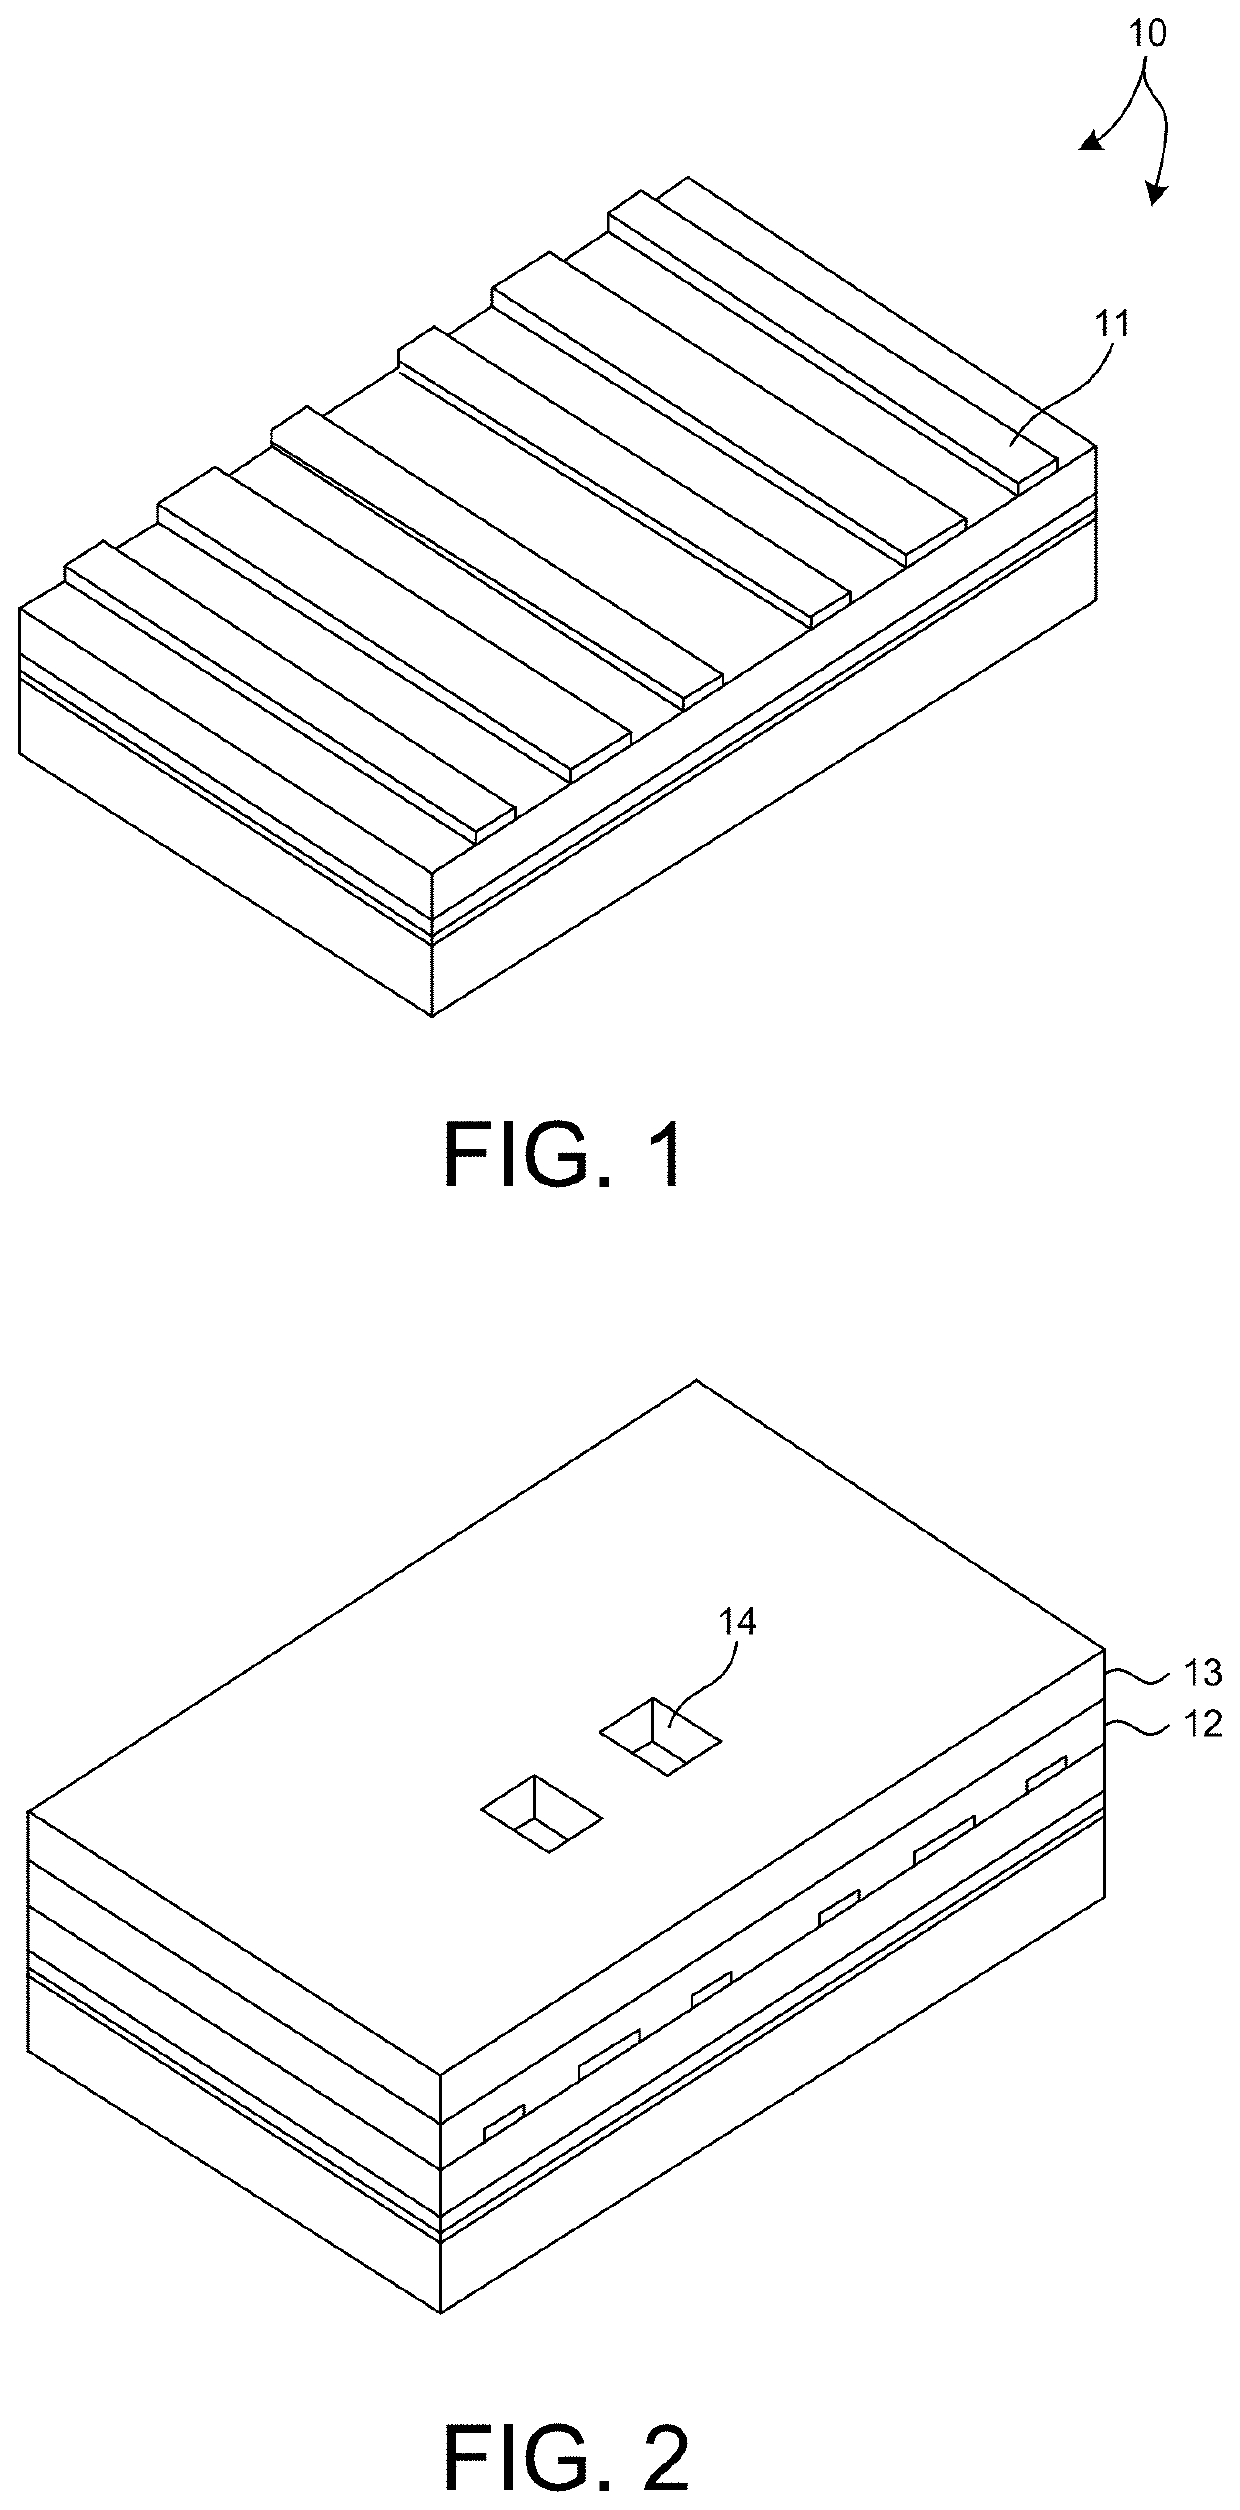 Methods And Systems For Overlay Measurement Based On Soft X-Ray Scatterometry